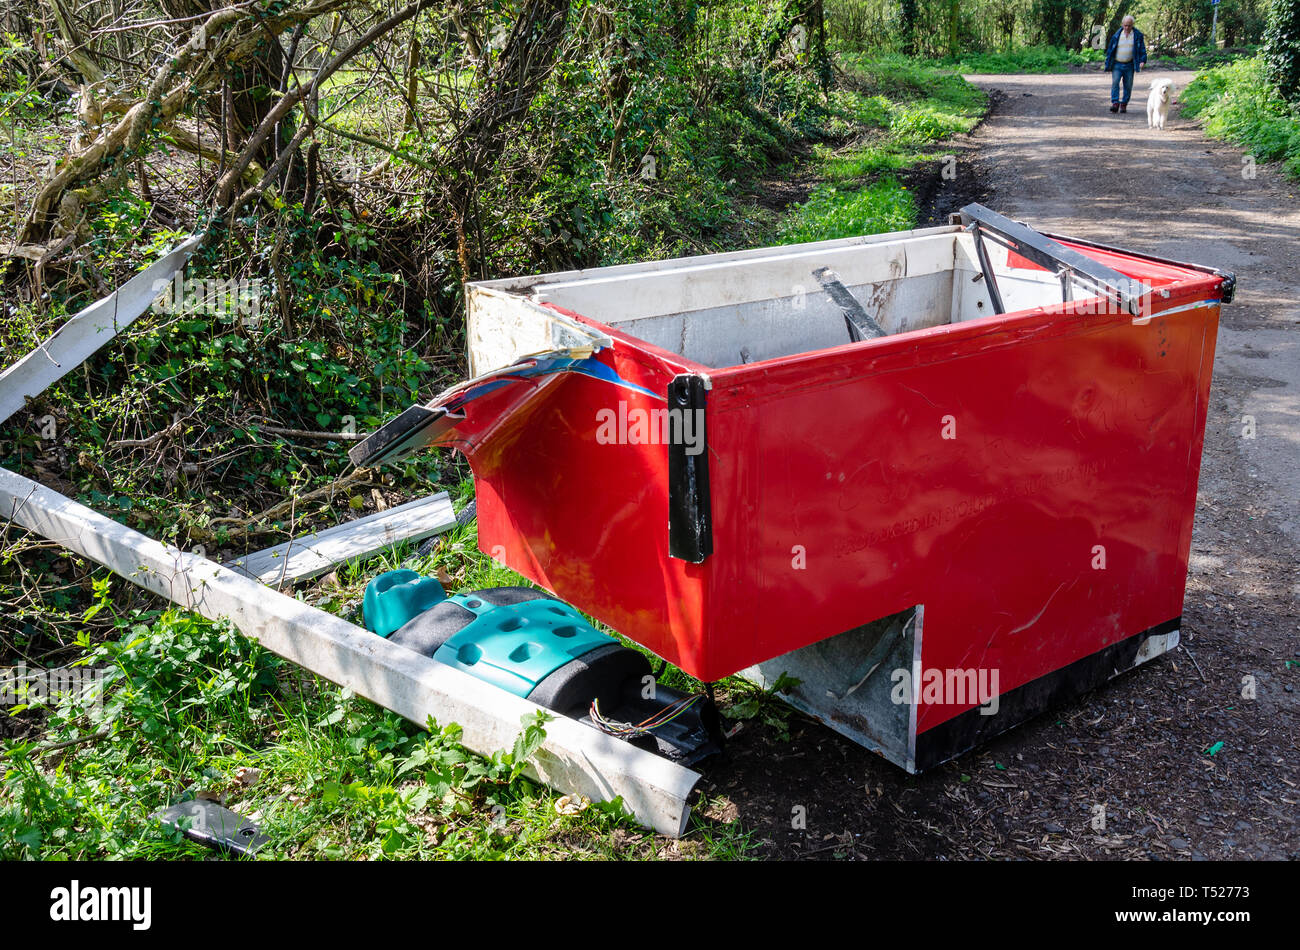 A bright red commercial freezer is dumped with other rubbish in a country lane near the village of Perton, Wolverhampton in South Staffordshire. Stock Photo